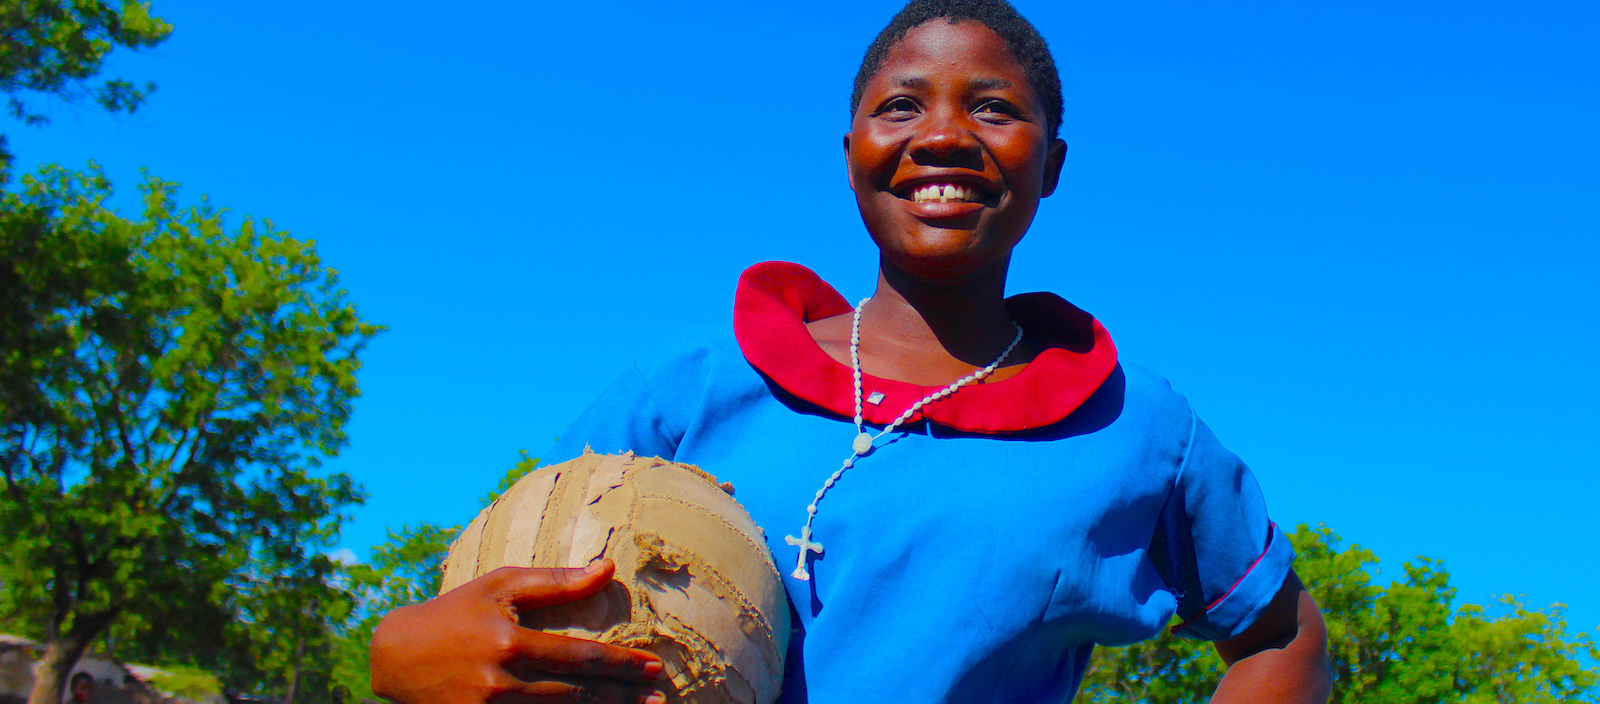 The Skillz program at Mwanza Primary School in Nchalo has been implemented with the help of Concern and uses the medium of soccer to teach life skills, gender equality, hygiene, and life goals to students. Student Christina Kamangira (15) says, “I have learned about what I love: cooking, playing, and lots more.”